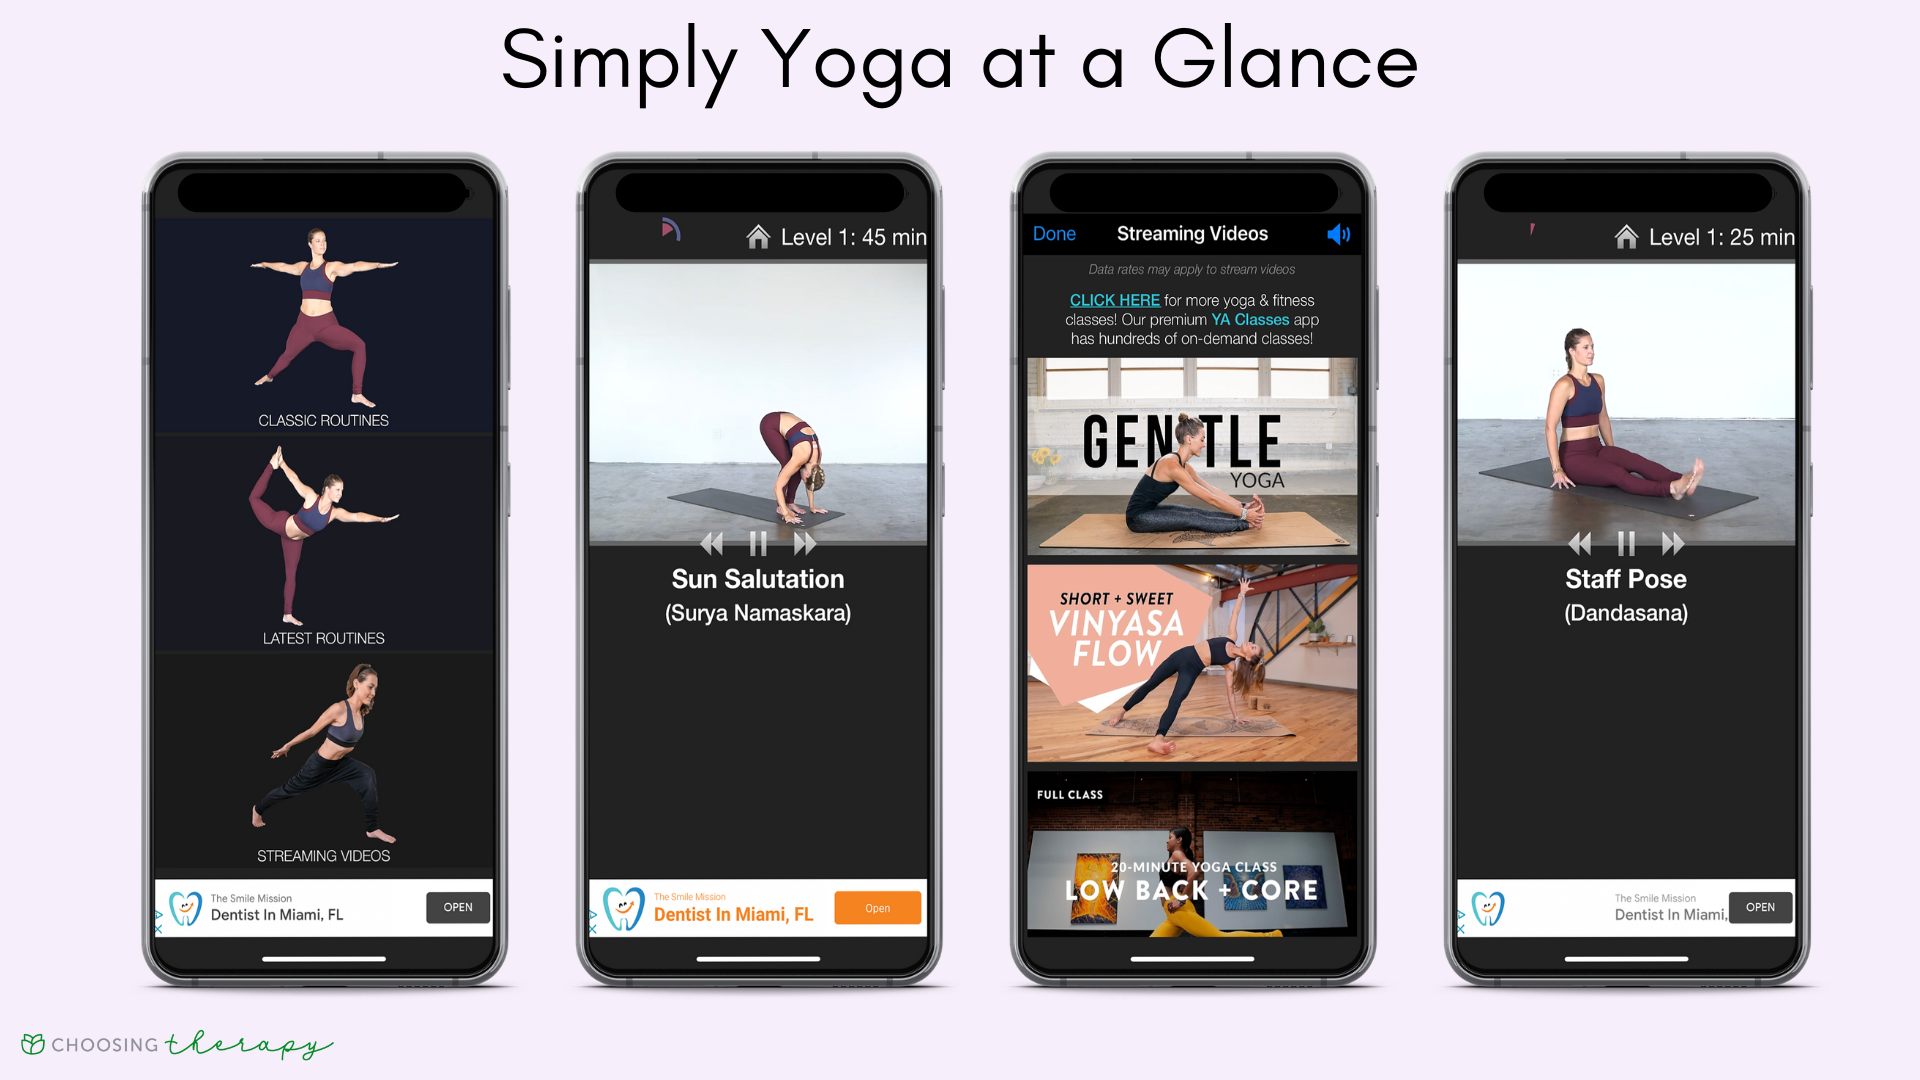 Four images of key features of the Simply Yoga app